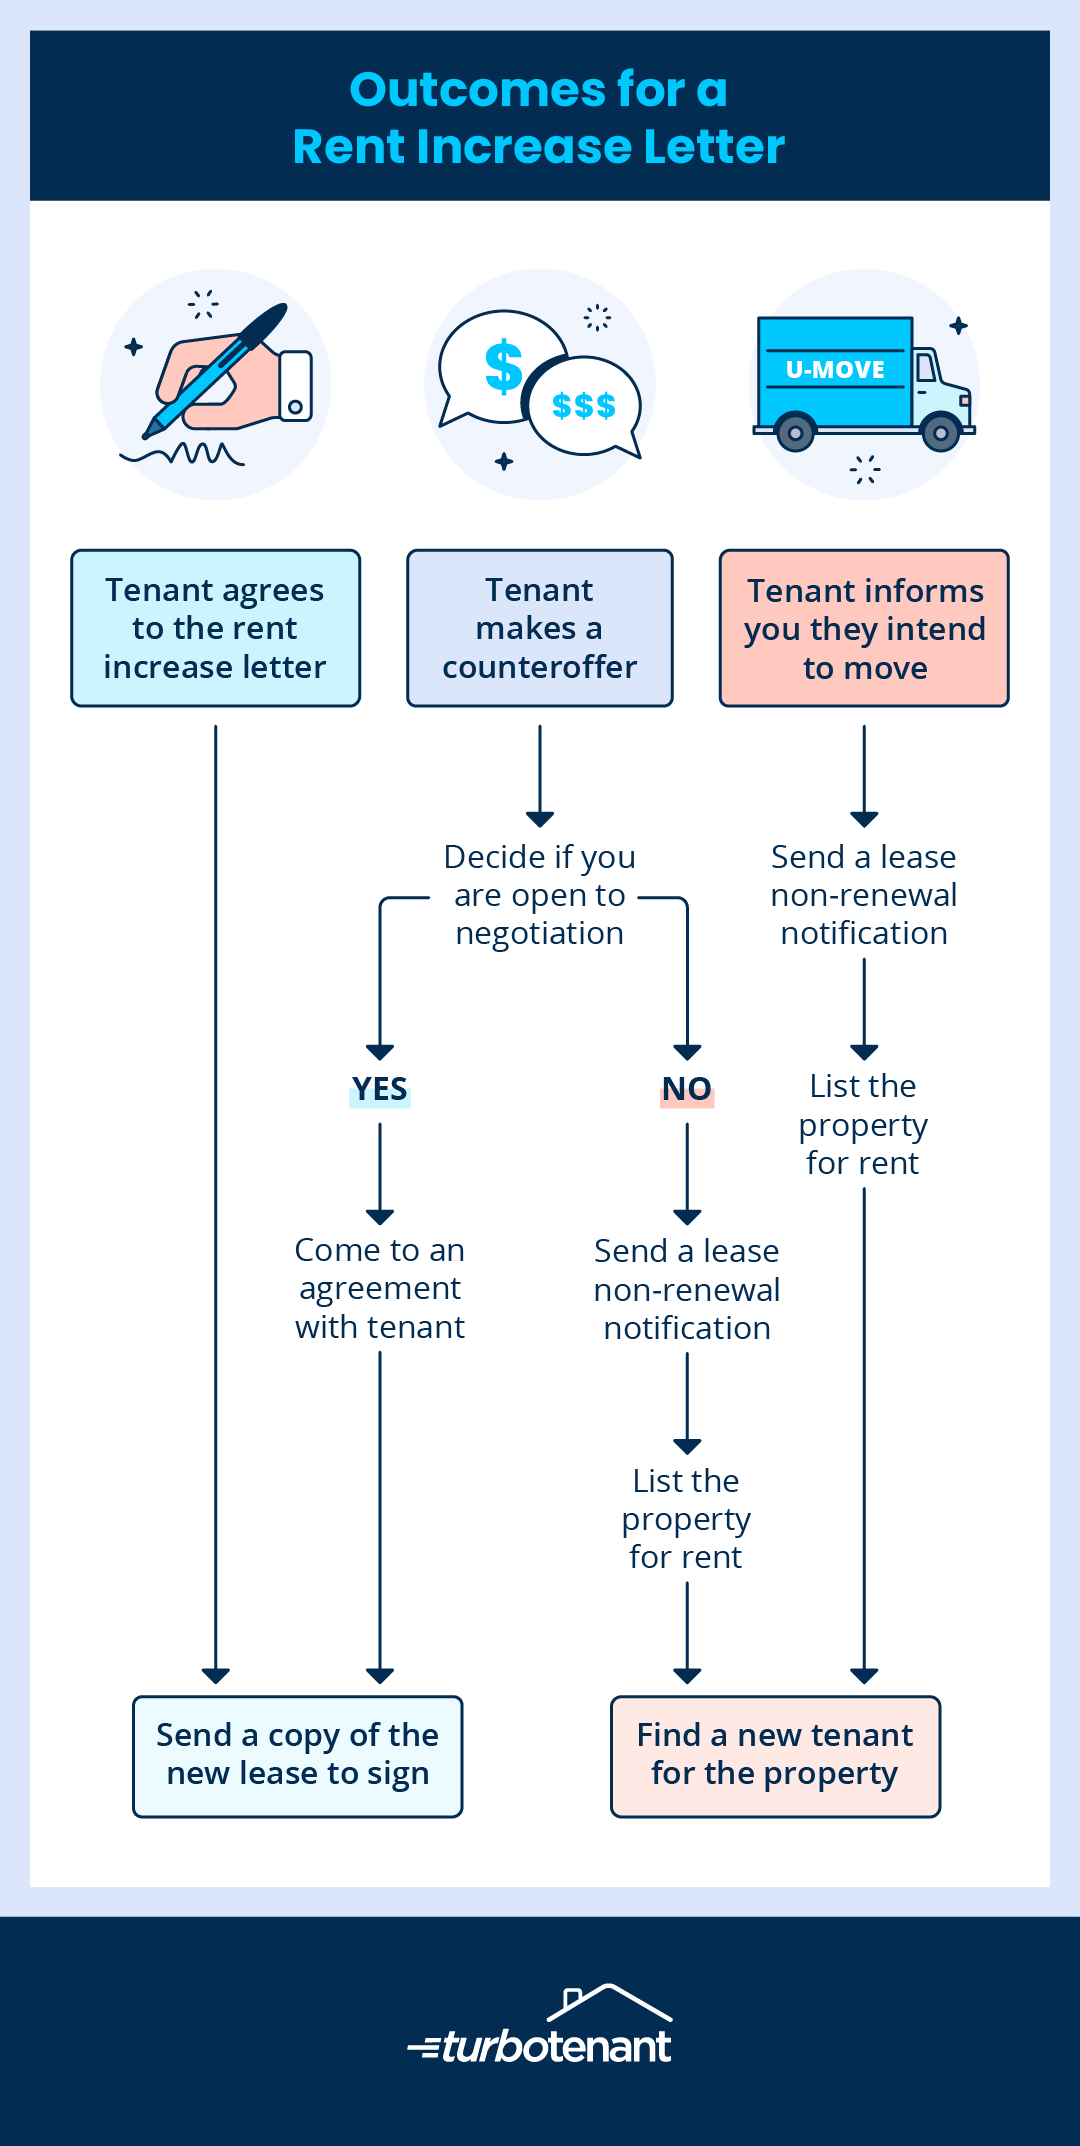 outcomes for a rent increase letter flowchart